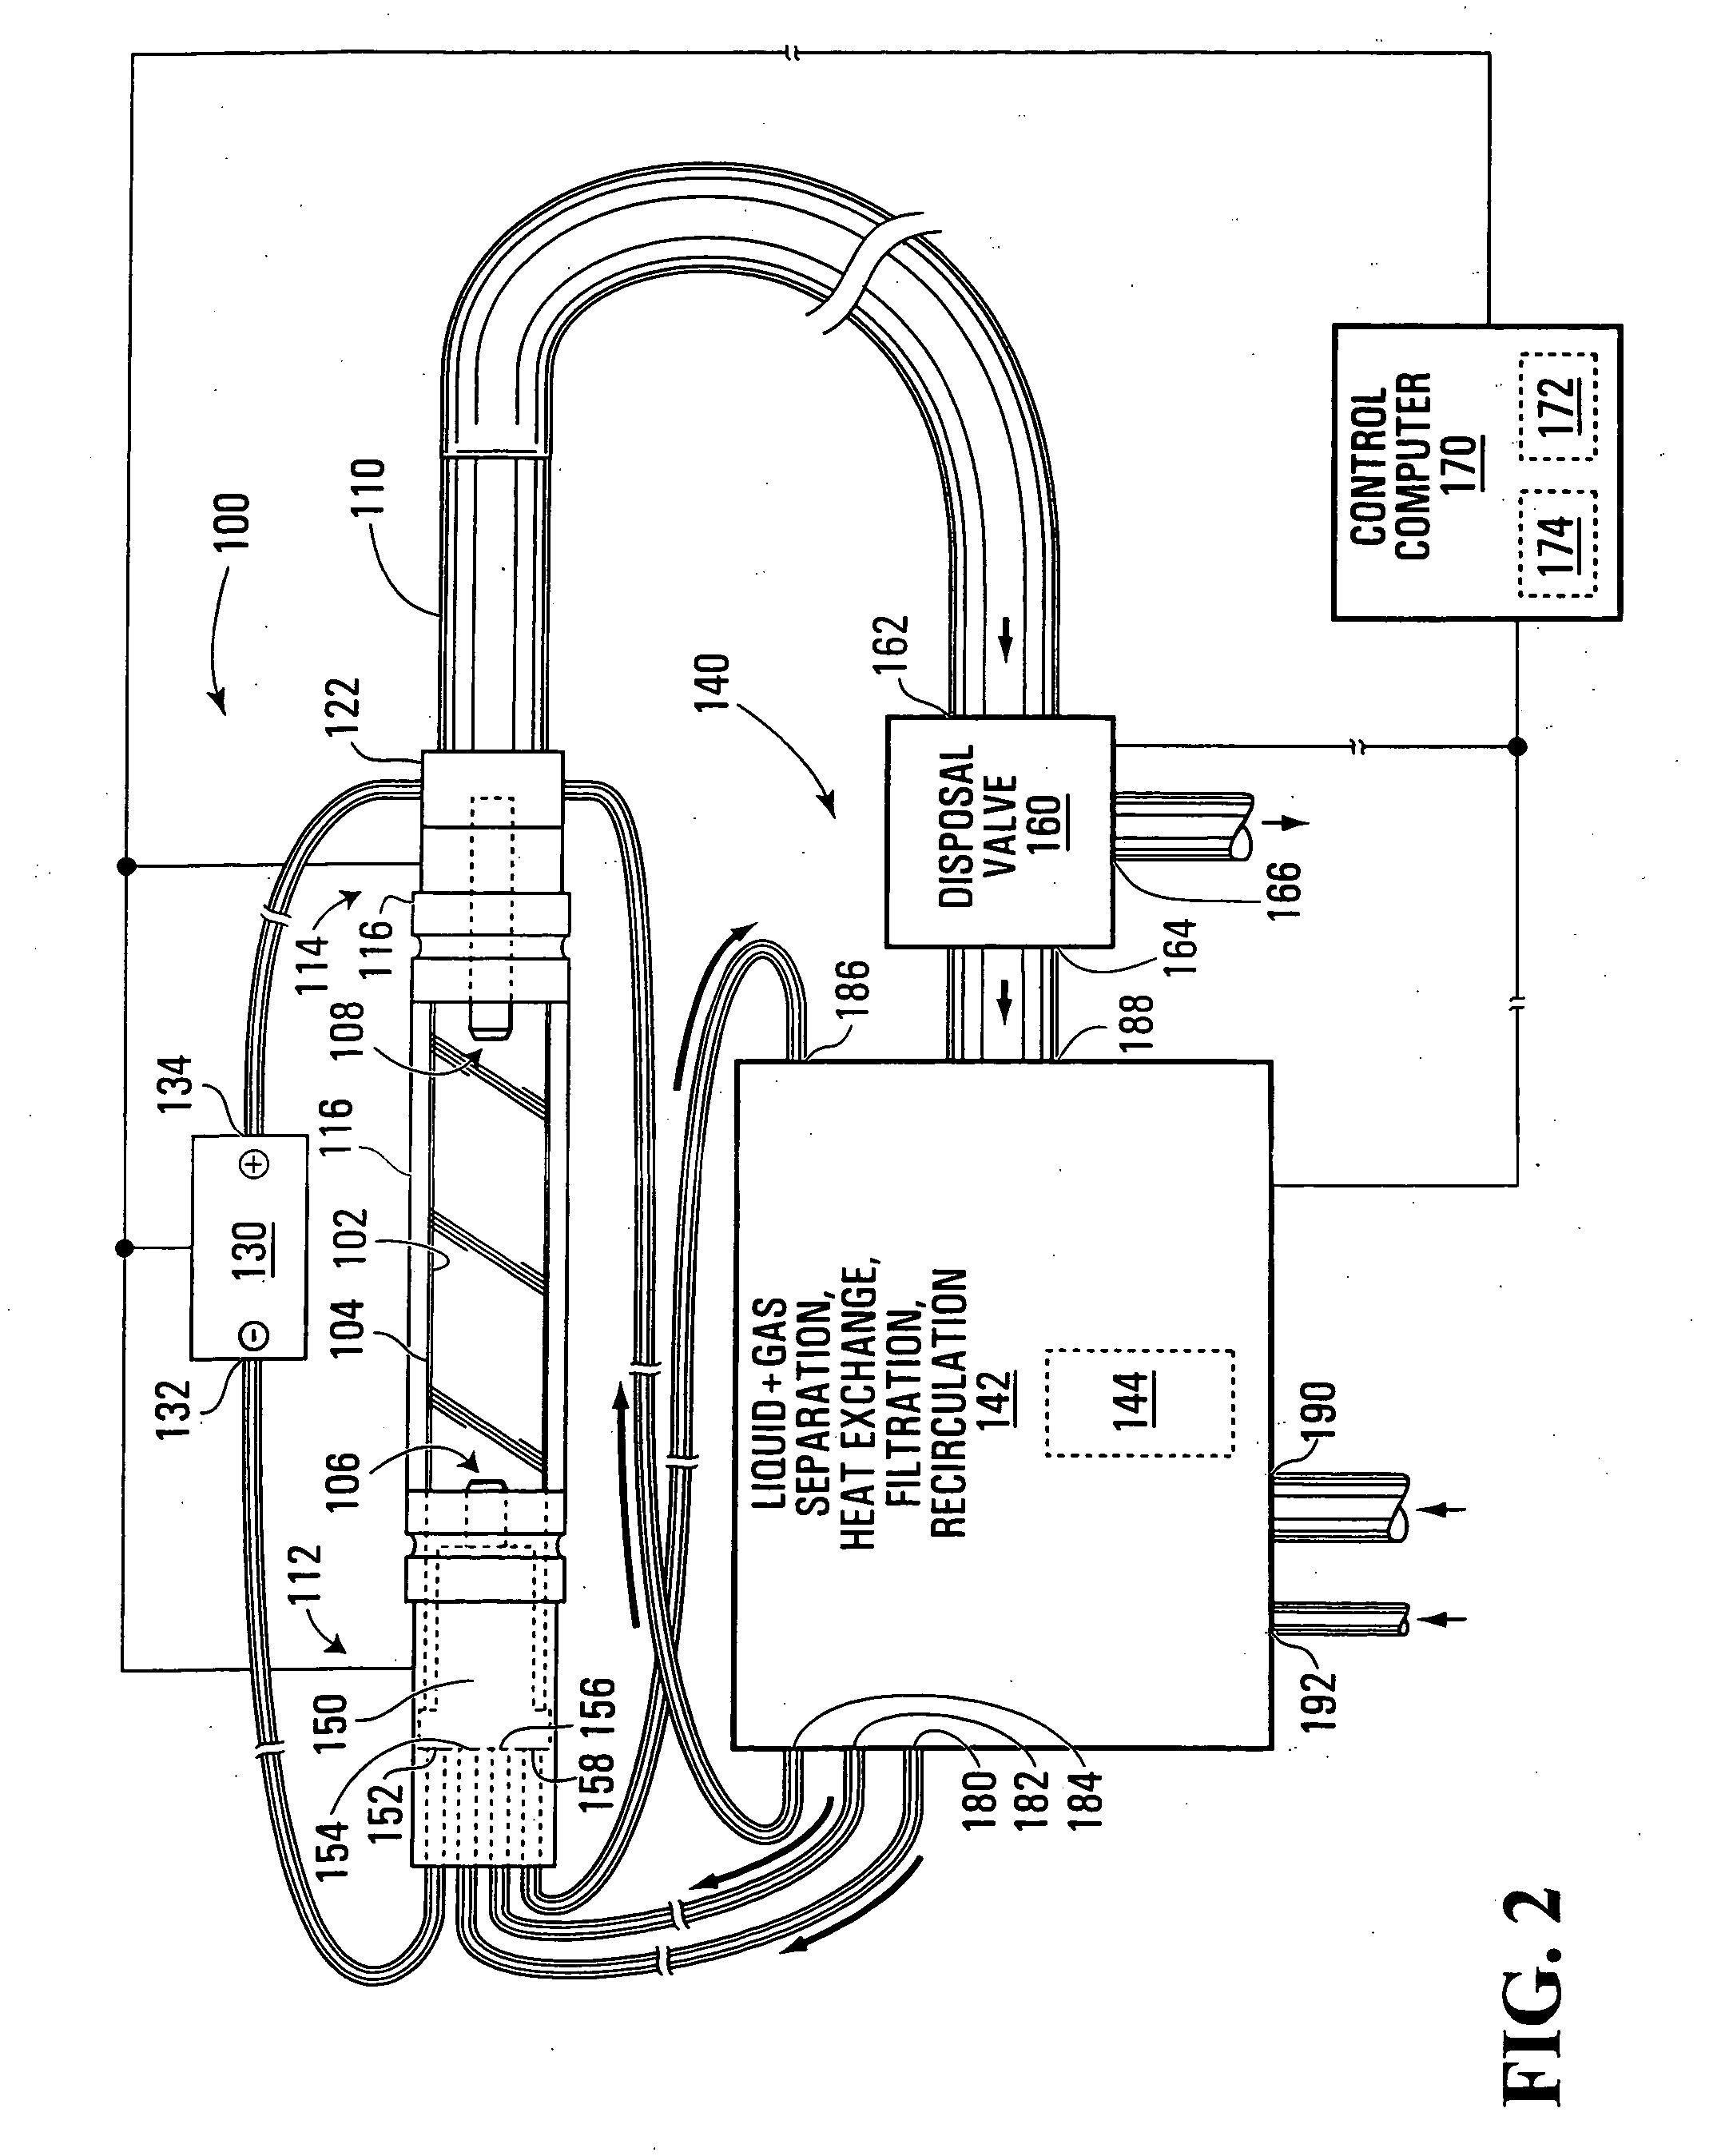 High-intensity electromagnetic radiation apparatus and methods